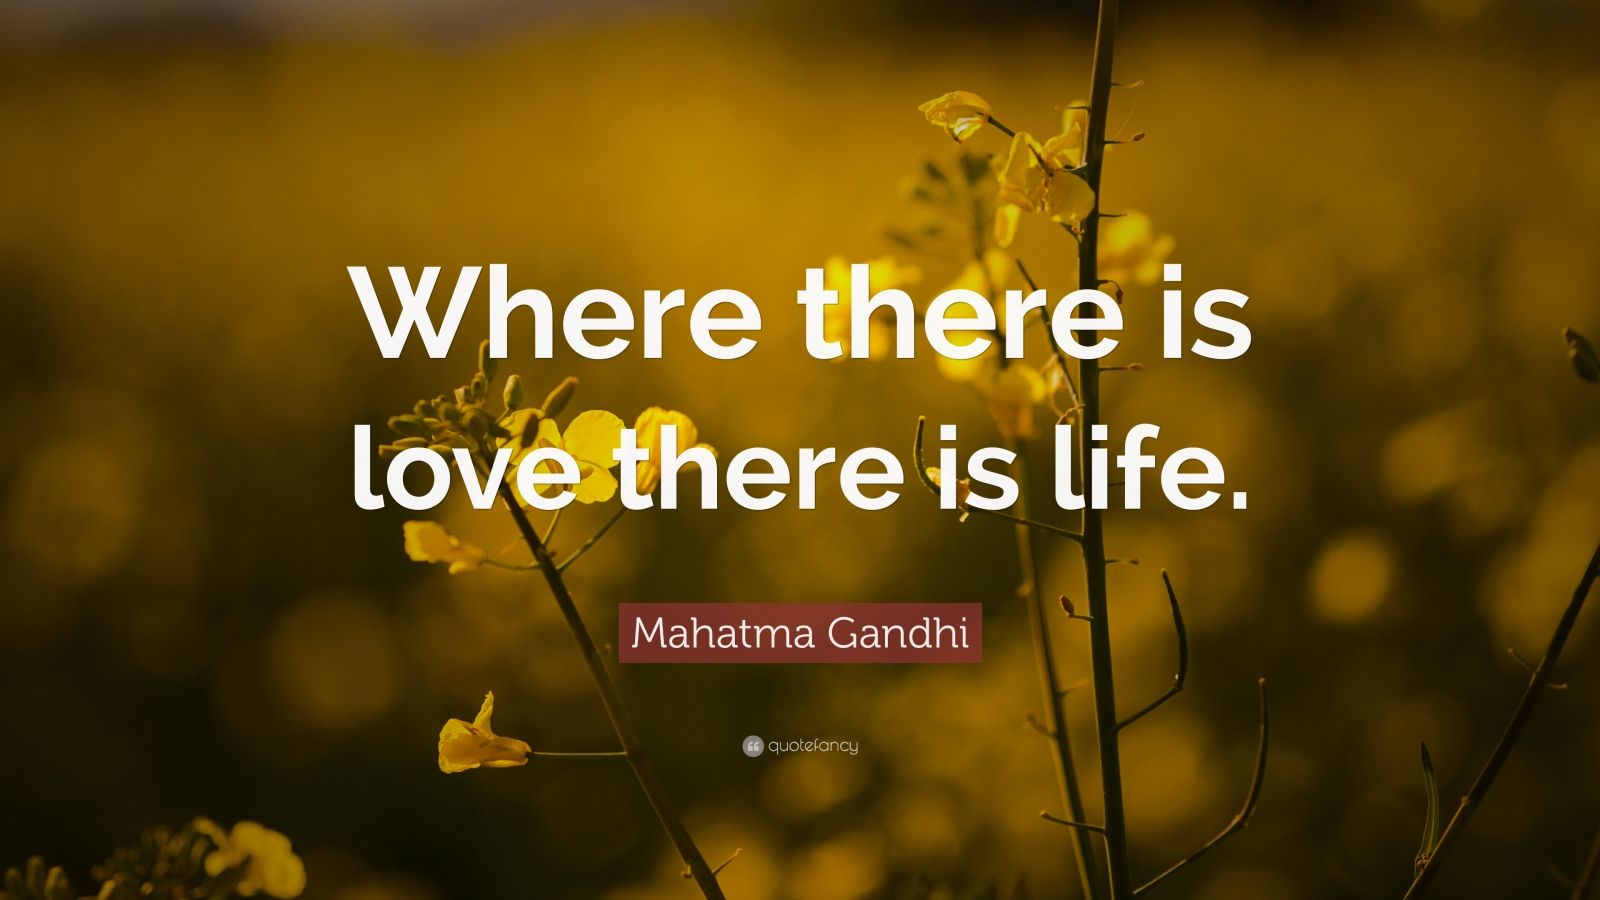 Mahatma Gandhi Quote: “Where there is love there is life.” (21